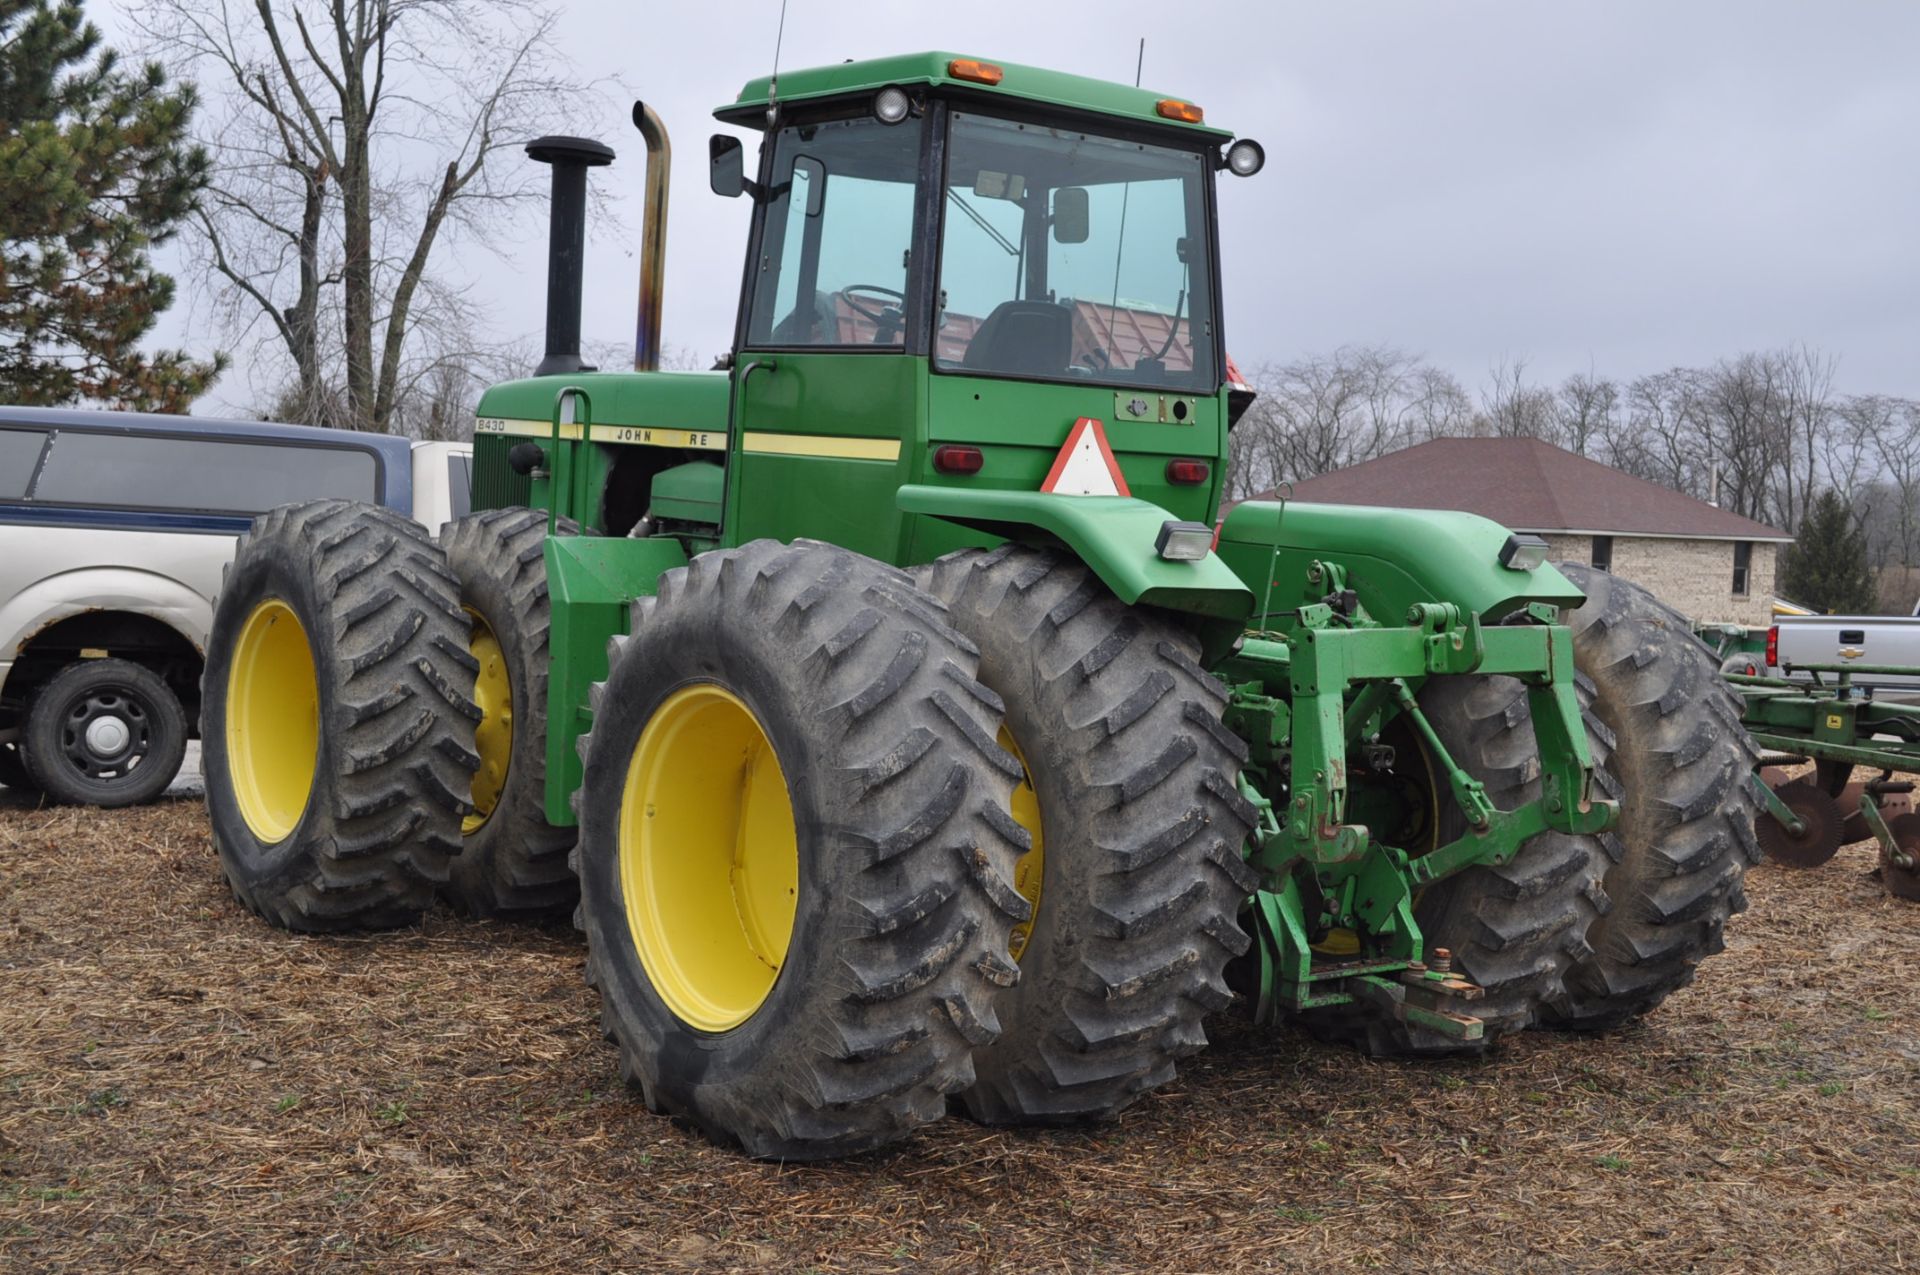 John Deere 8430 tractor, 4WD, diesel, 20.8-34 duals, CHA, Quad range, 3 hyd remotes, 1000 pto, 3 pt, - Image 2 of 19